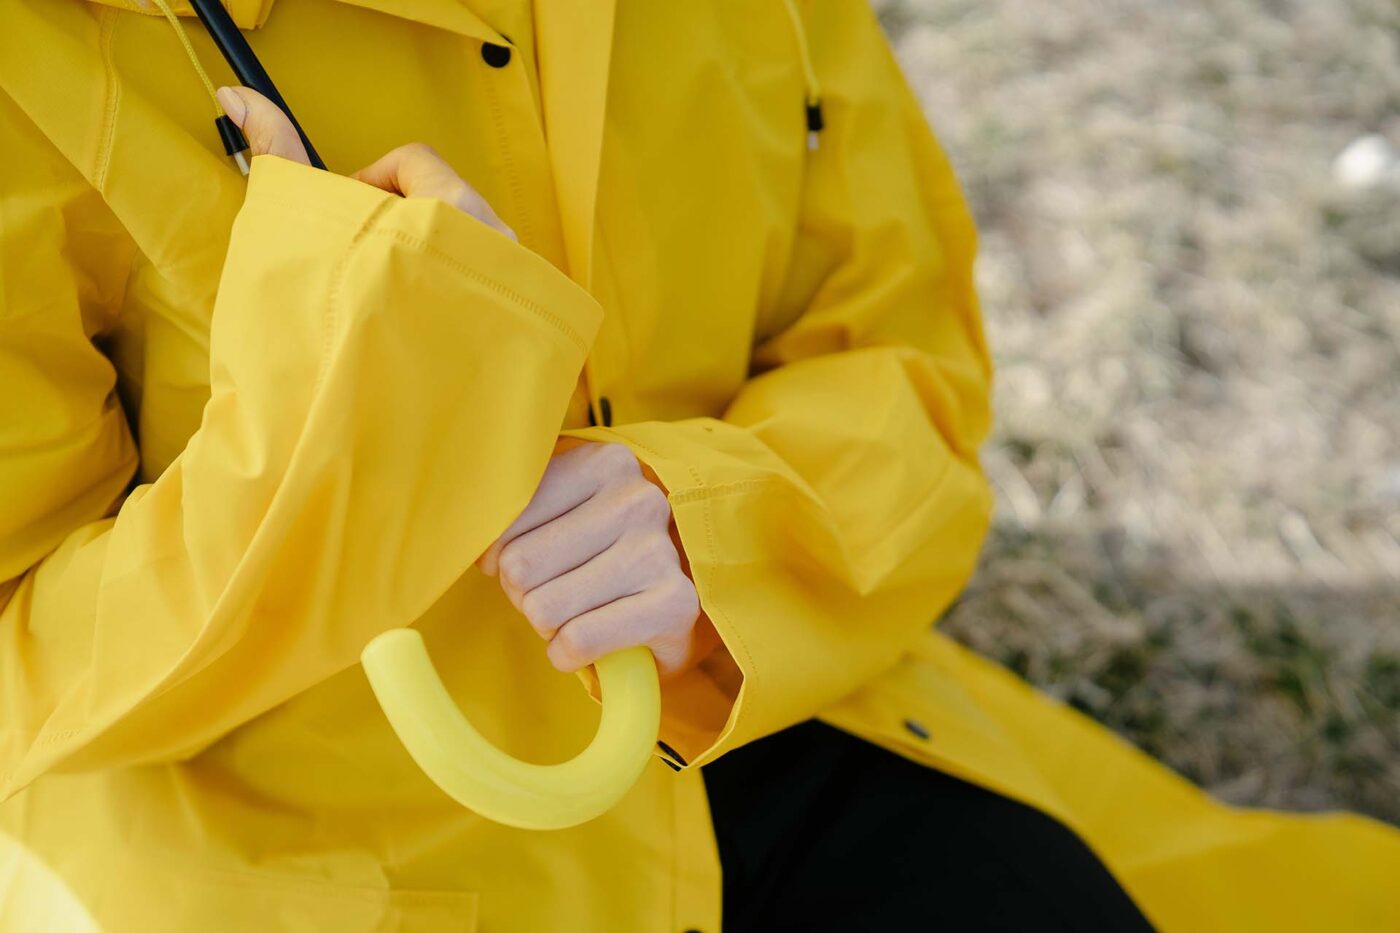 A person wearing a raincoat and holding an umbrella